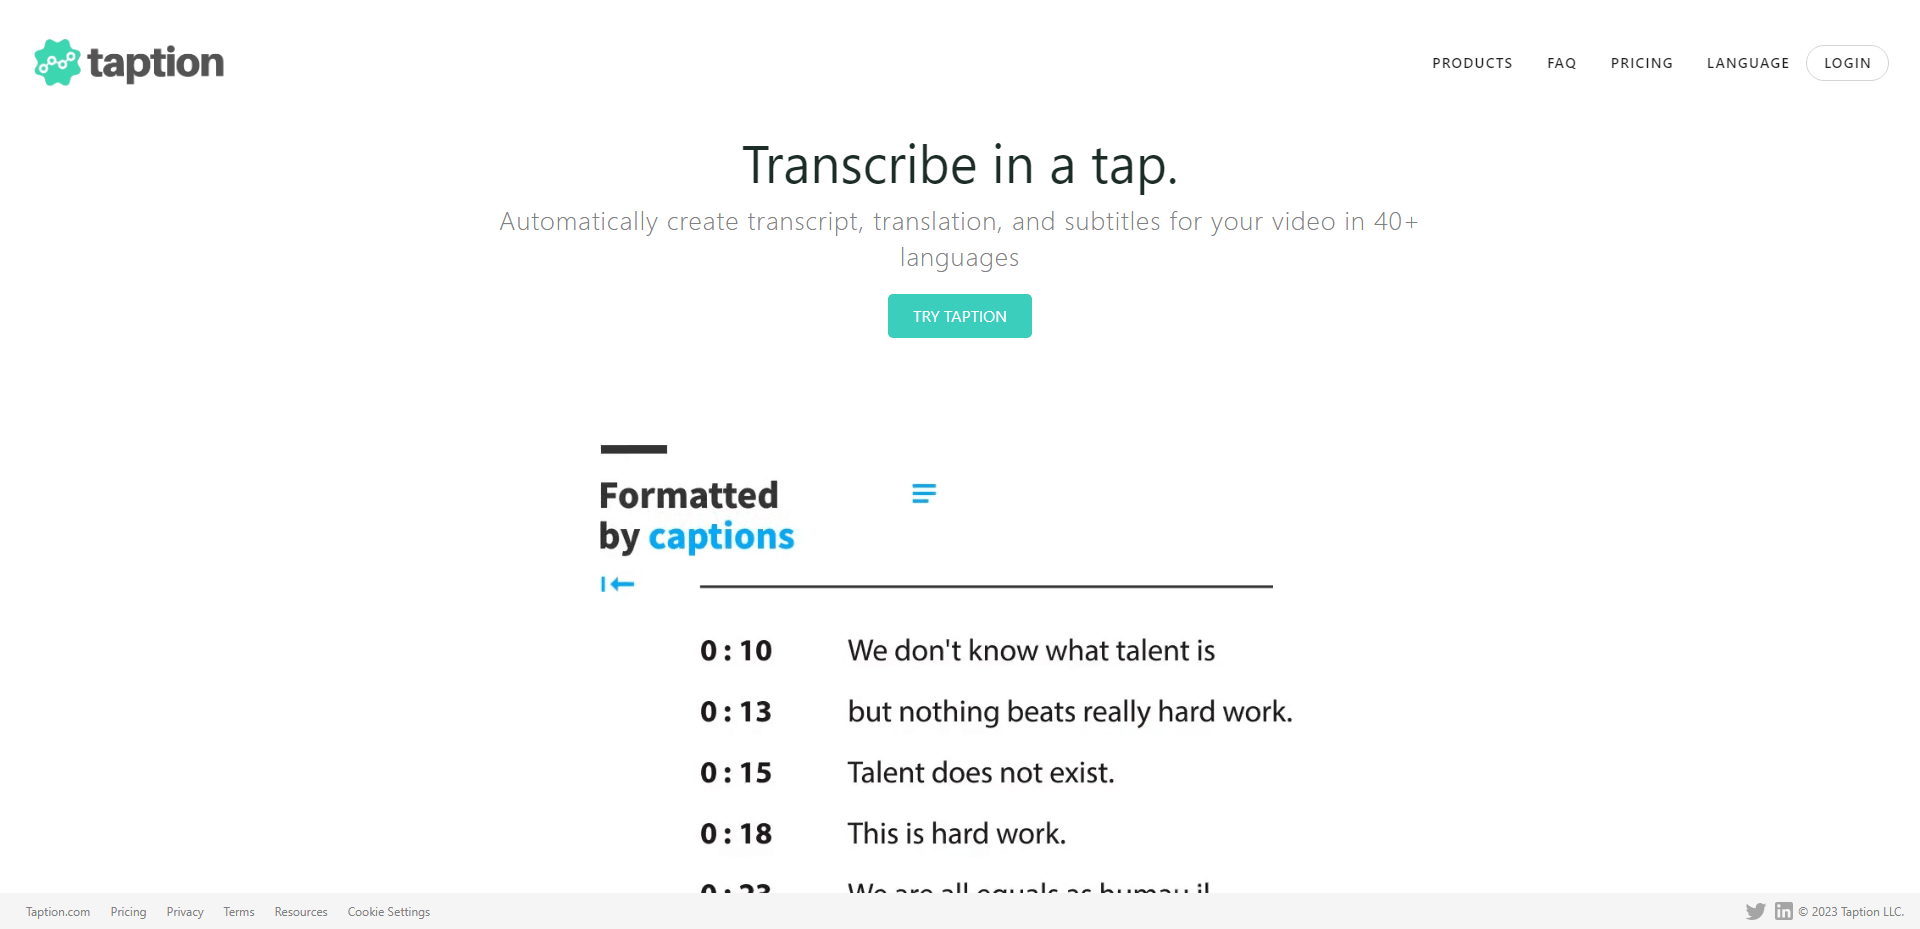 Taption - transcribing suite for videos